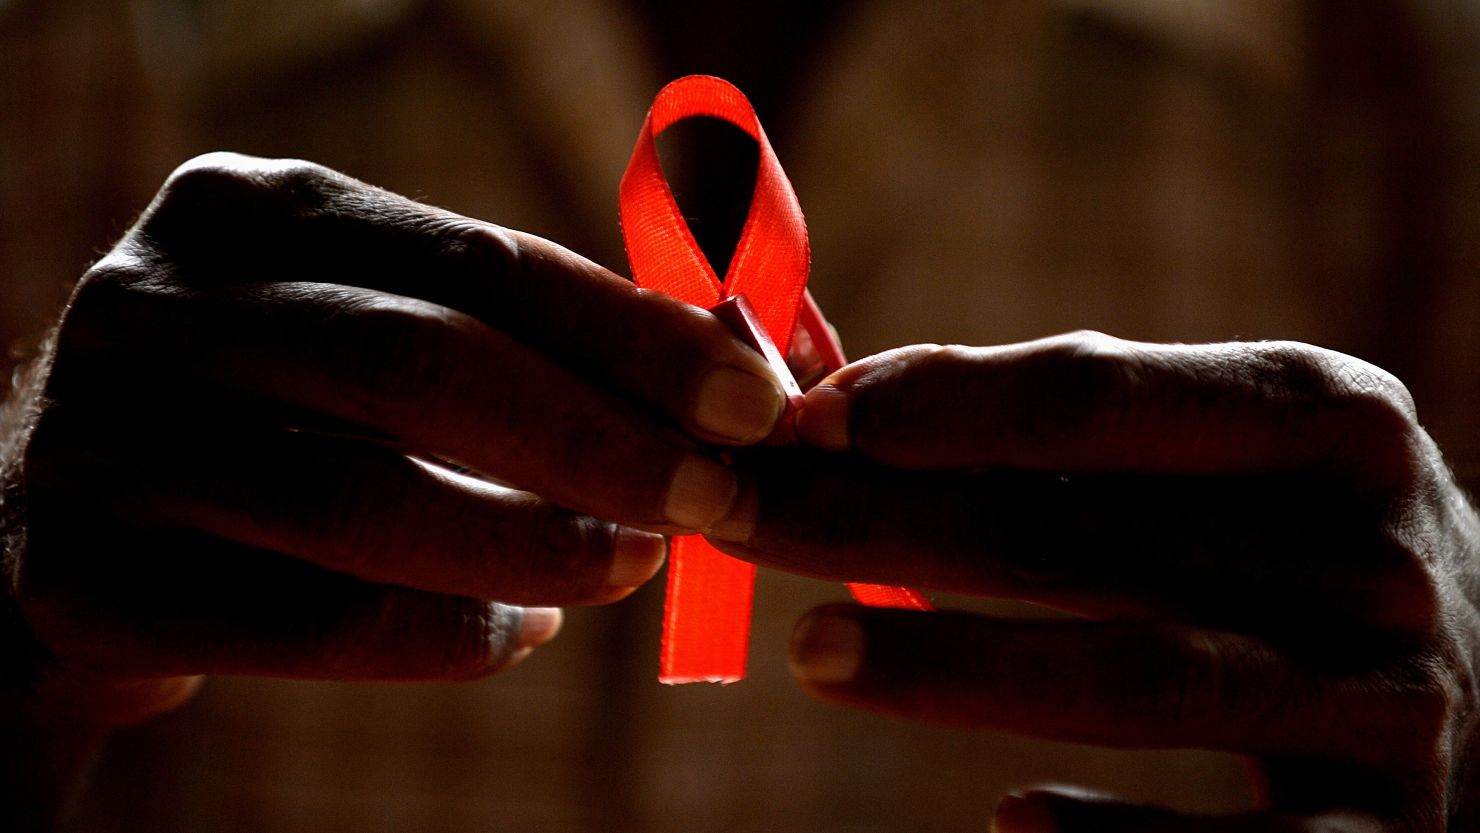 An HIV-positive person prepares red ribbons for World AIDS Day in Bangalore, India